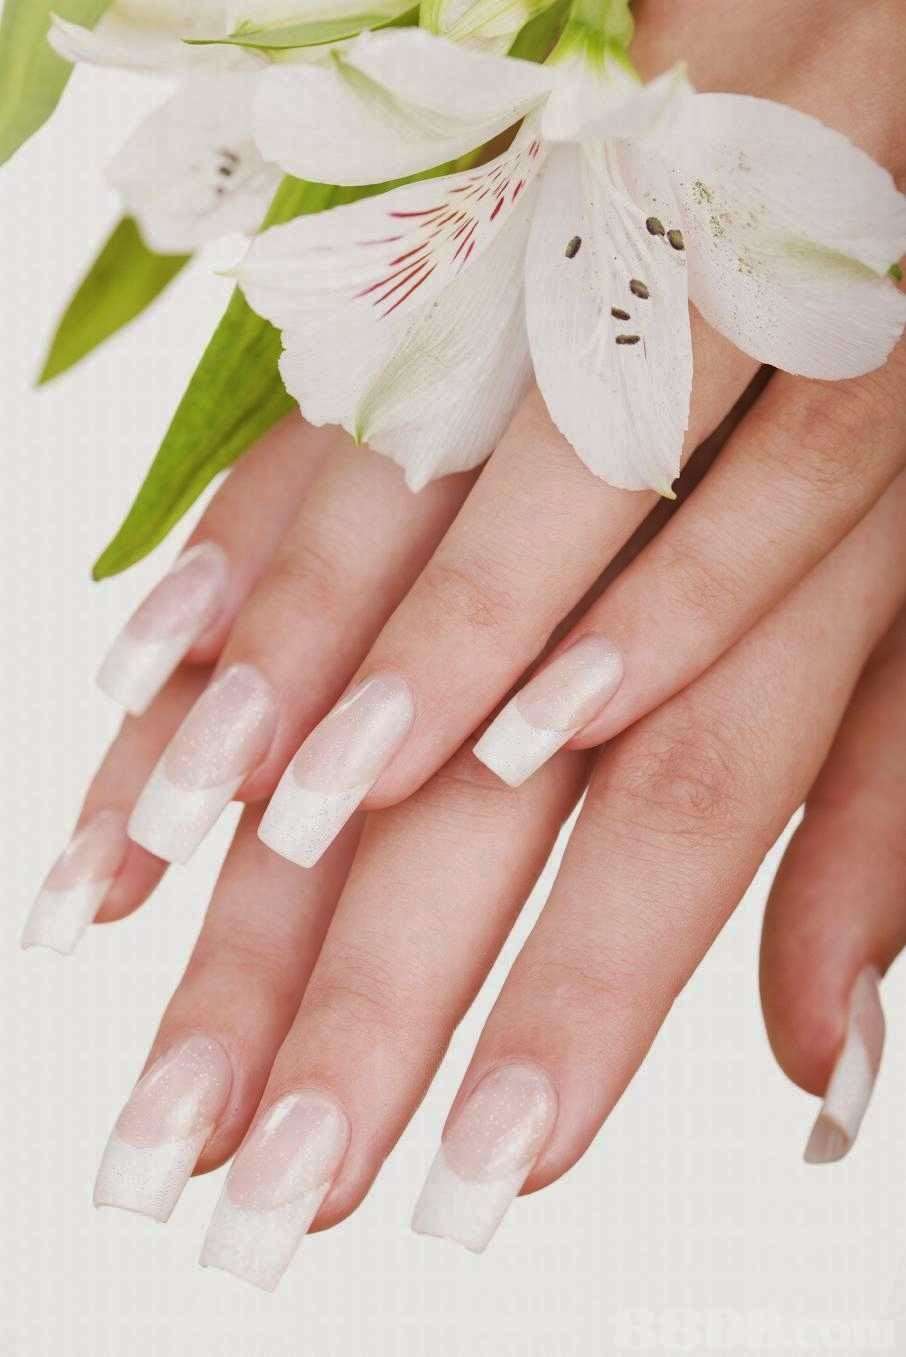 Crystals Nails | 3141 FM 528 Rd, Friendswood, TX 77546 | Phone: (281) 554-5462